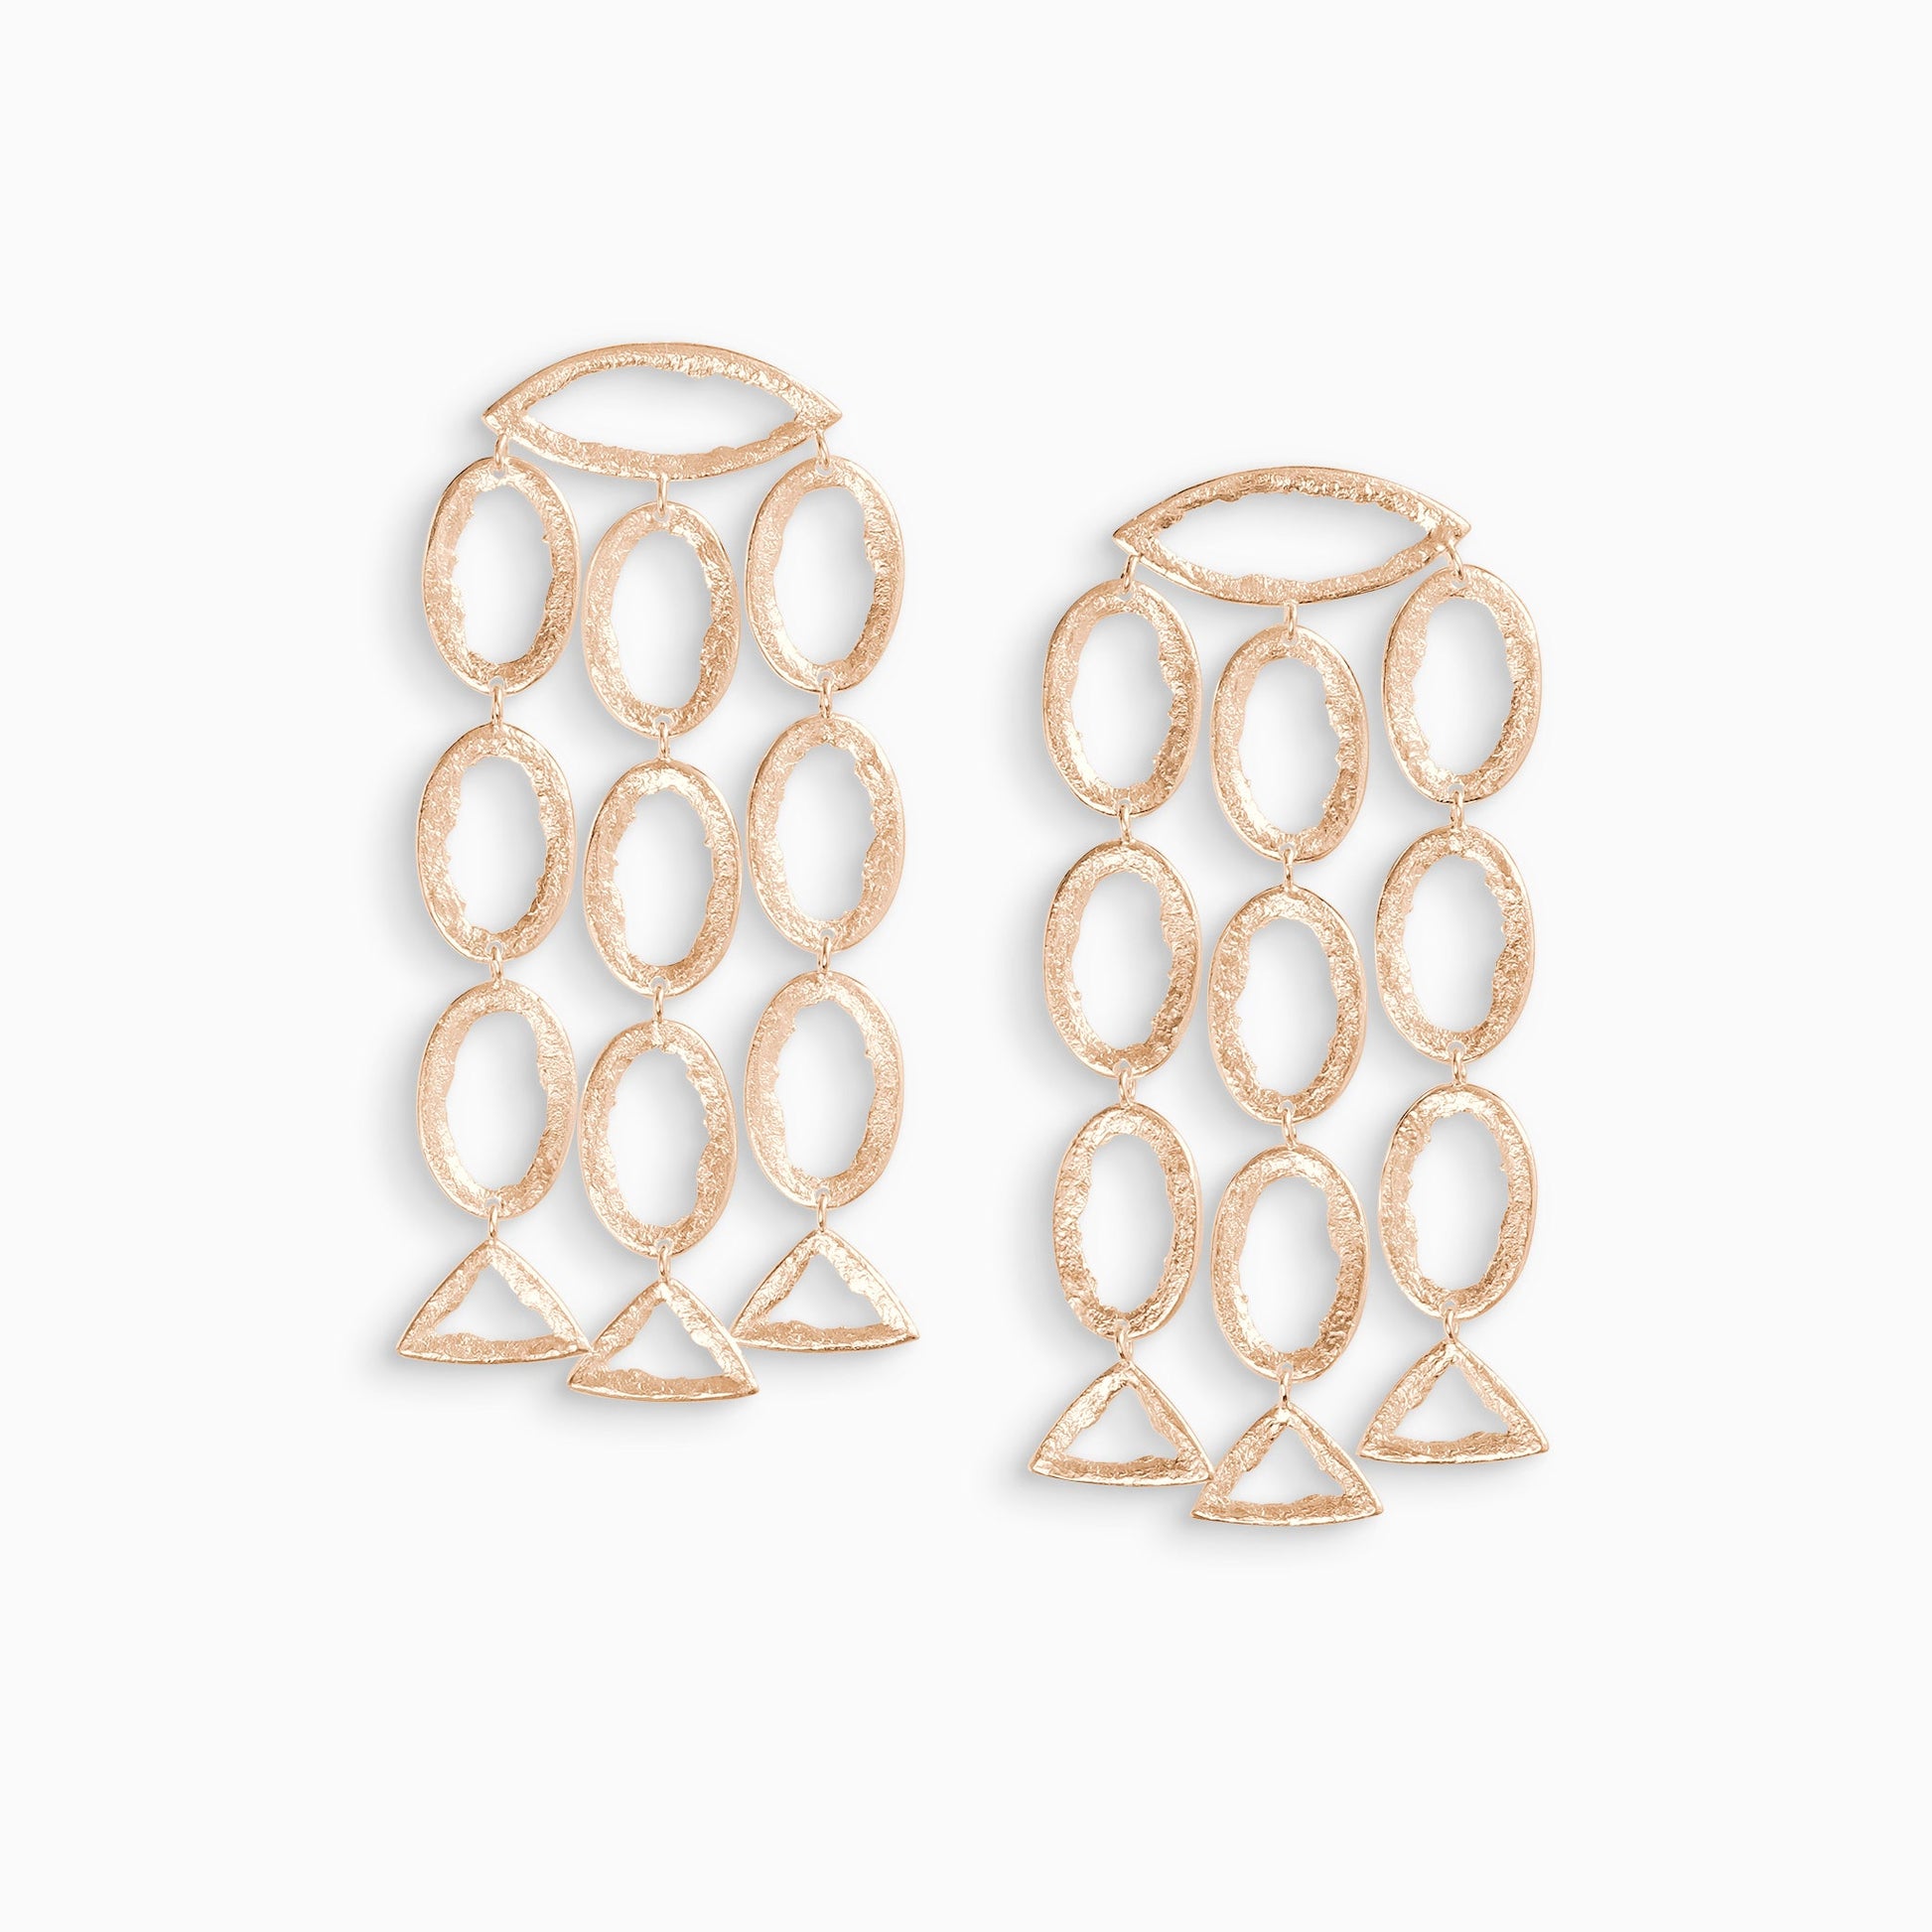 A pair of 18ct Fairtrade rose gold drop earrings. 3 parallel lines of articulating oval shapes hang from a horizontal lozenge shape with a stud ear fastening. These open shapes have a strong organic texture and are smooth on the outside edges with fragmented inside edges. 76mm length. 40mm width.